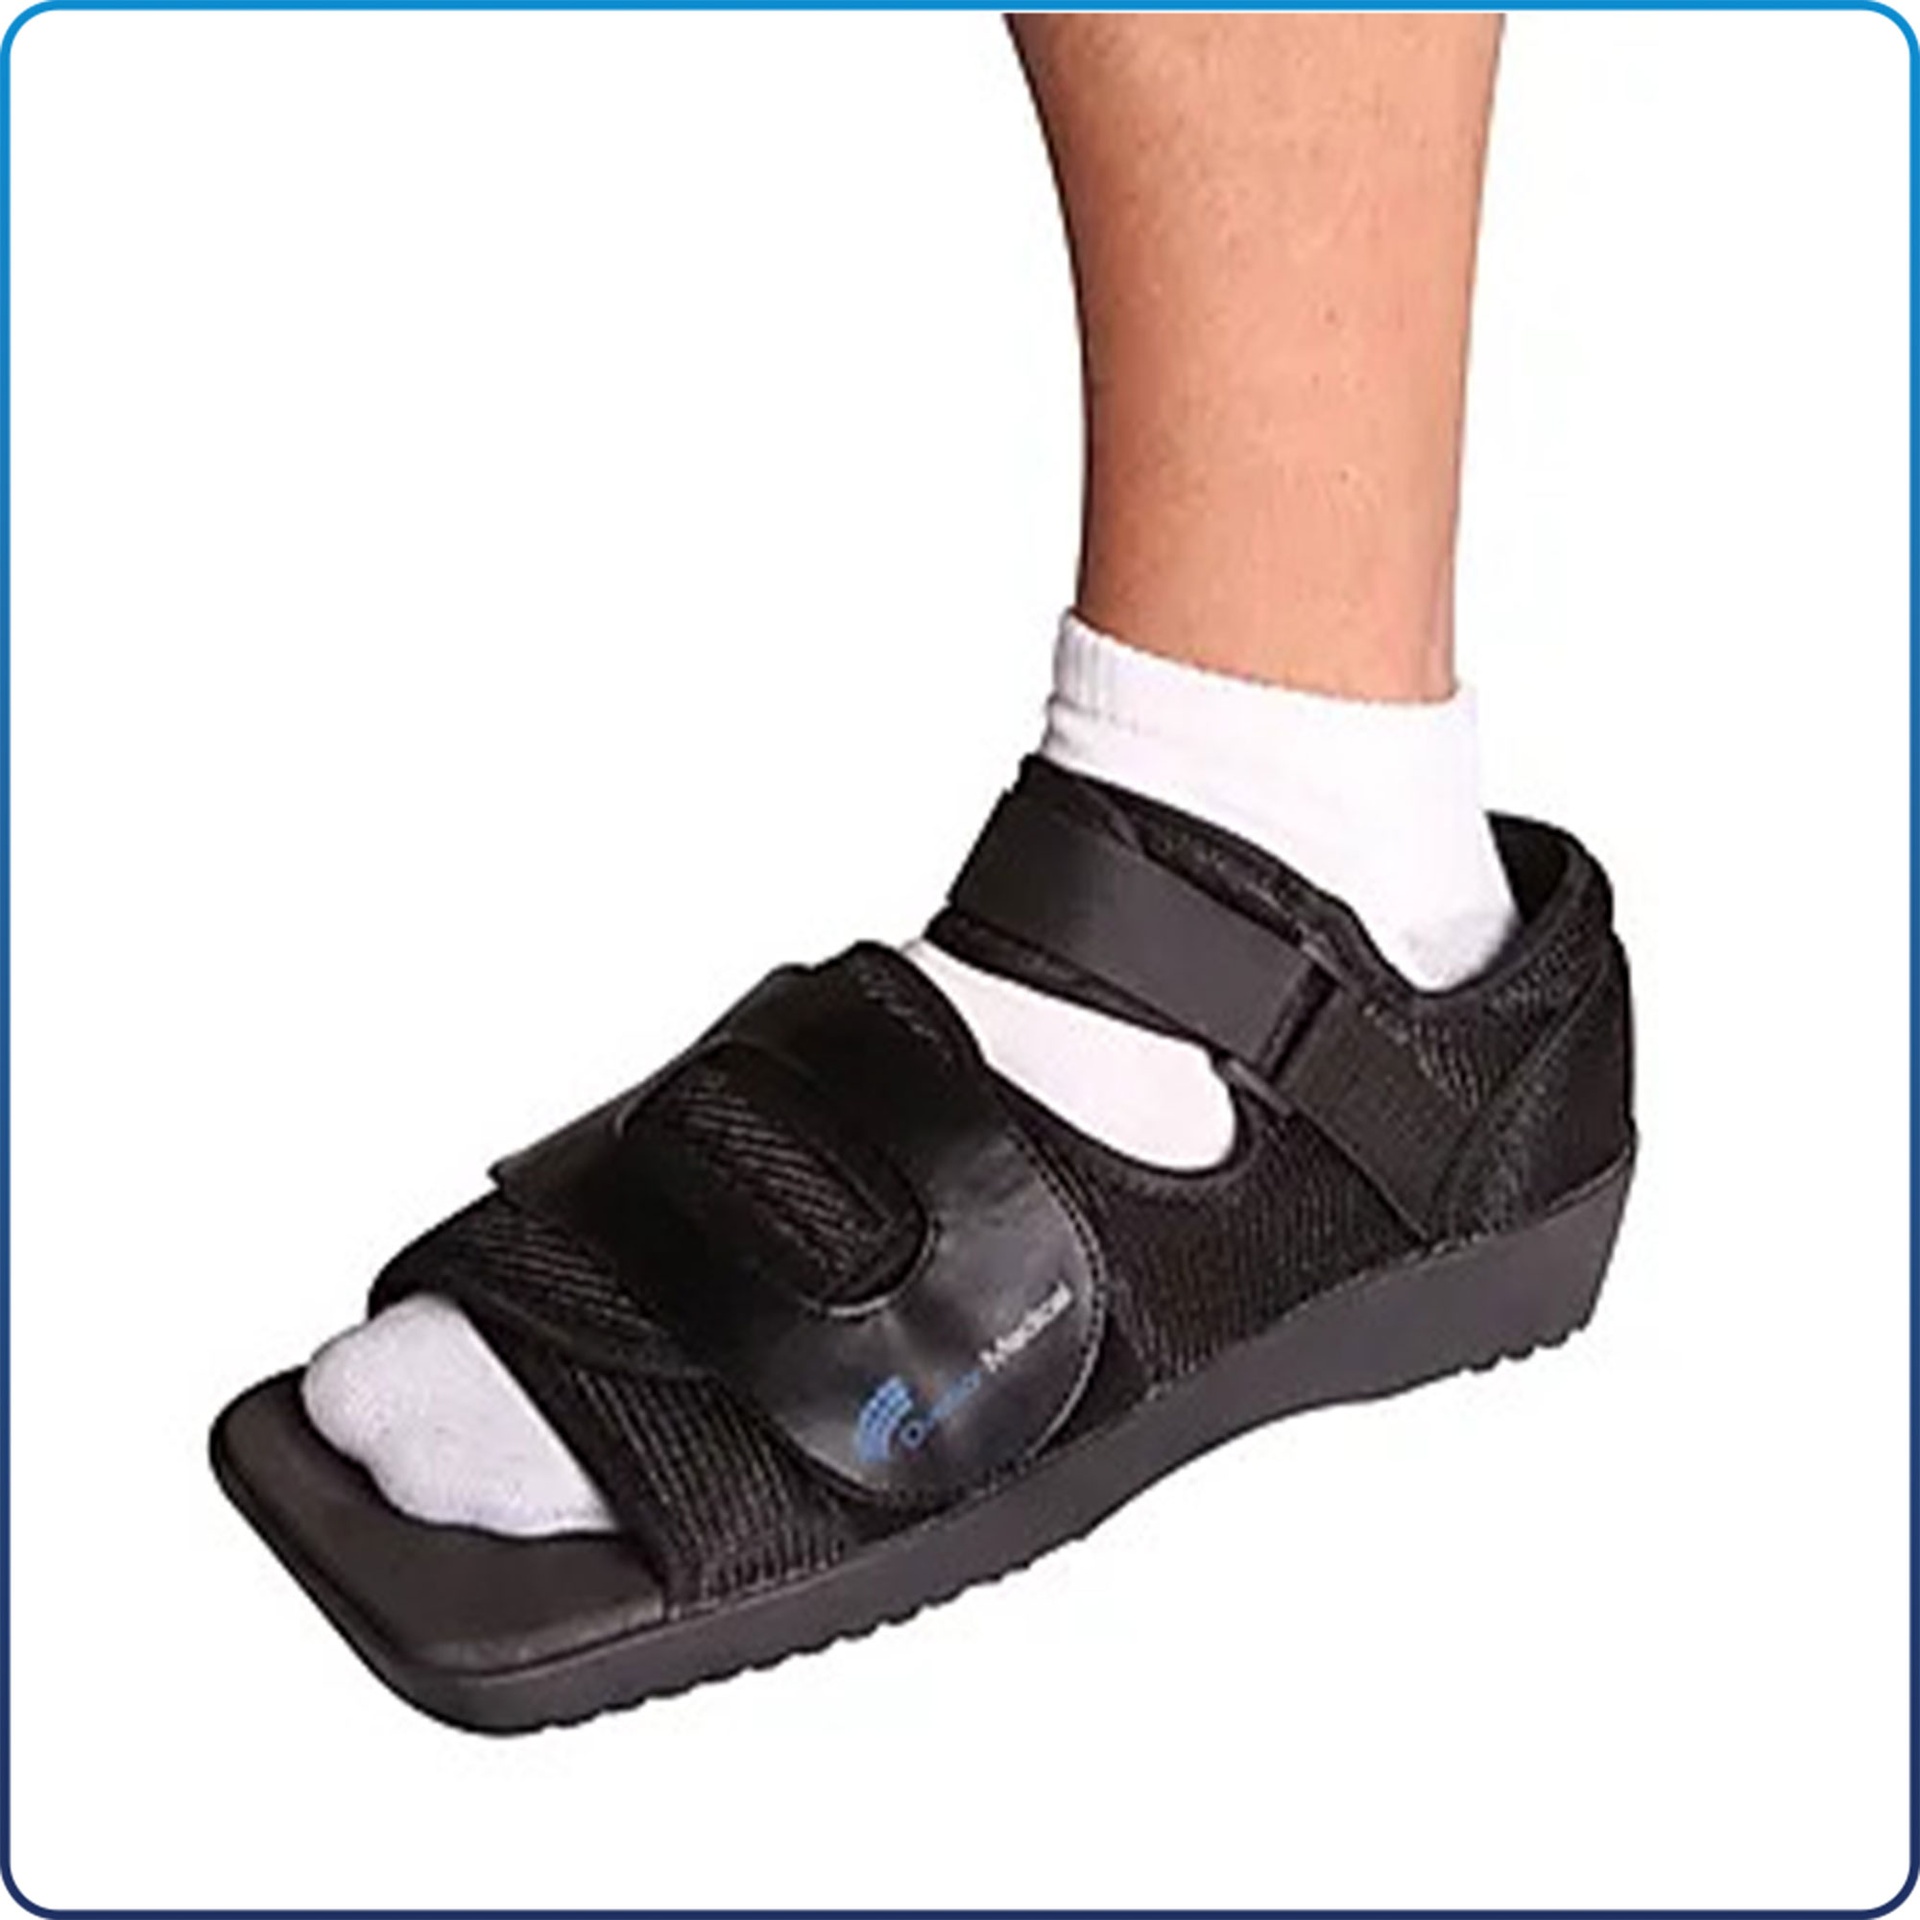 Square Toe Post-Op Shoe W/ High Ankle Strap